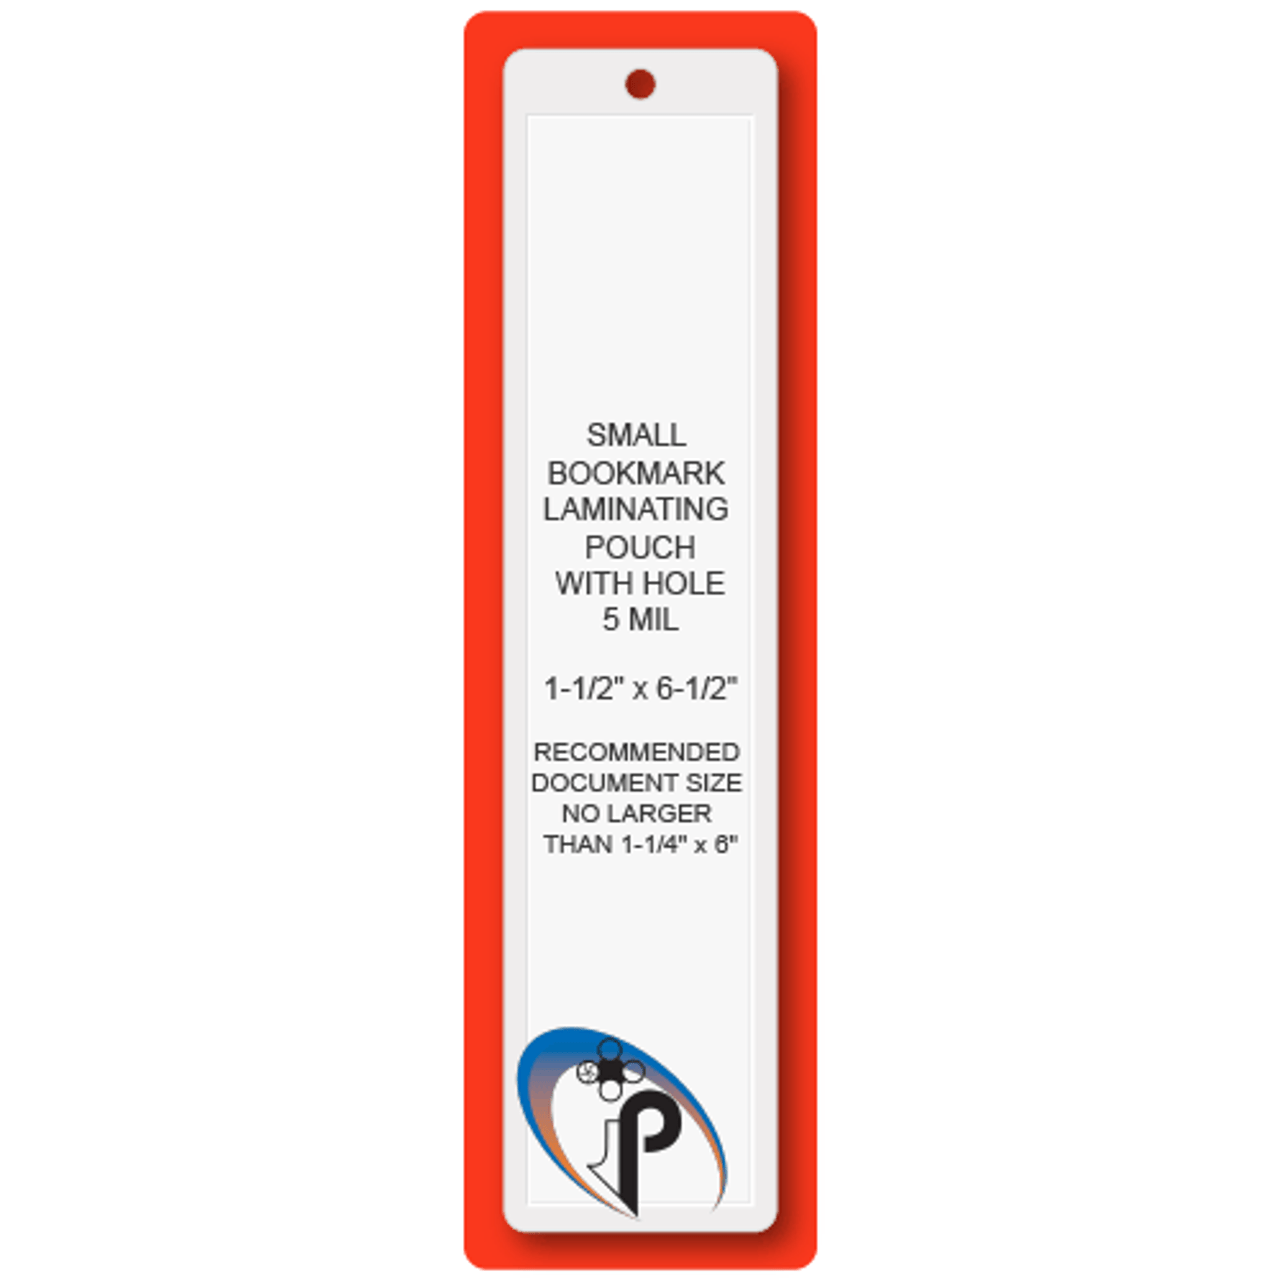 bookmark-laminating-pouch-small-5-mil